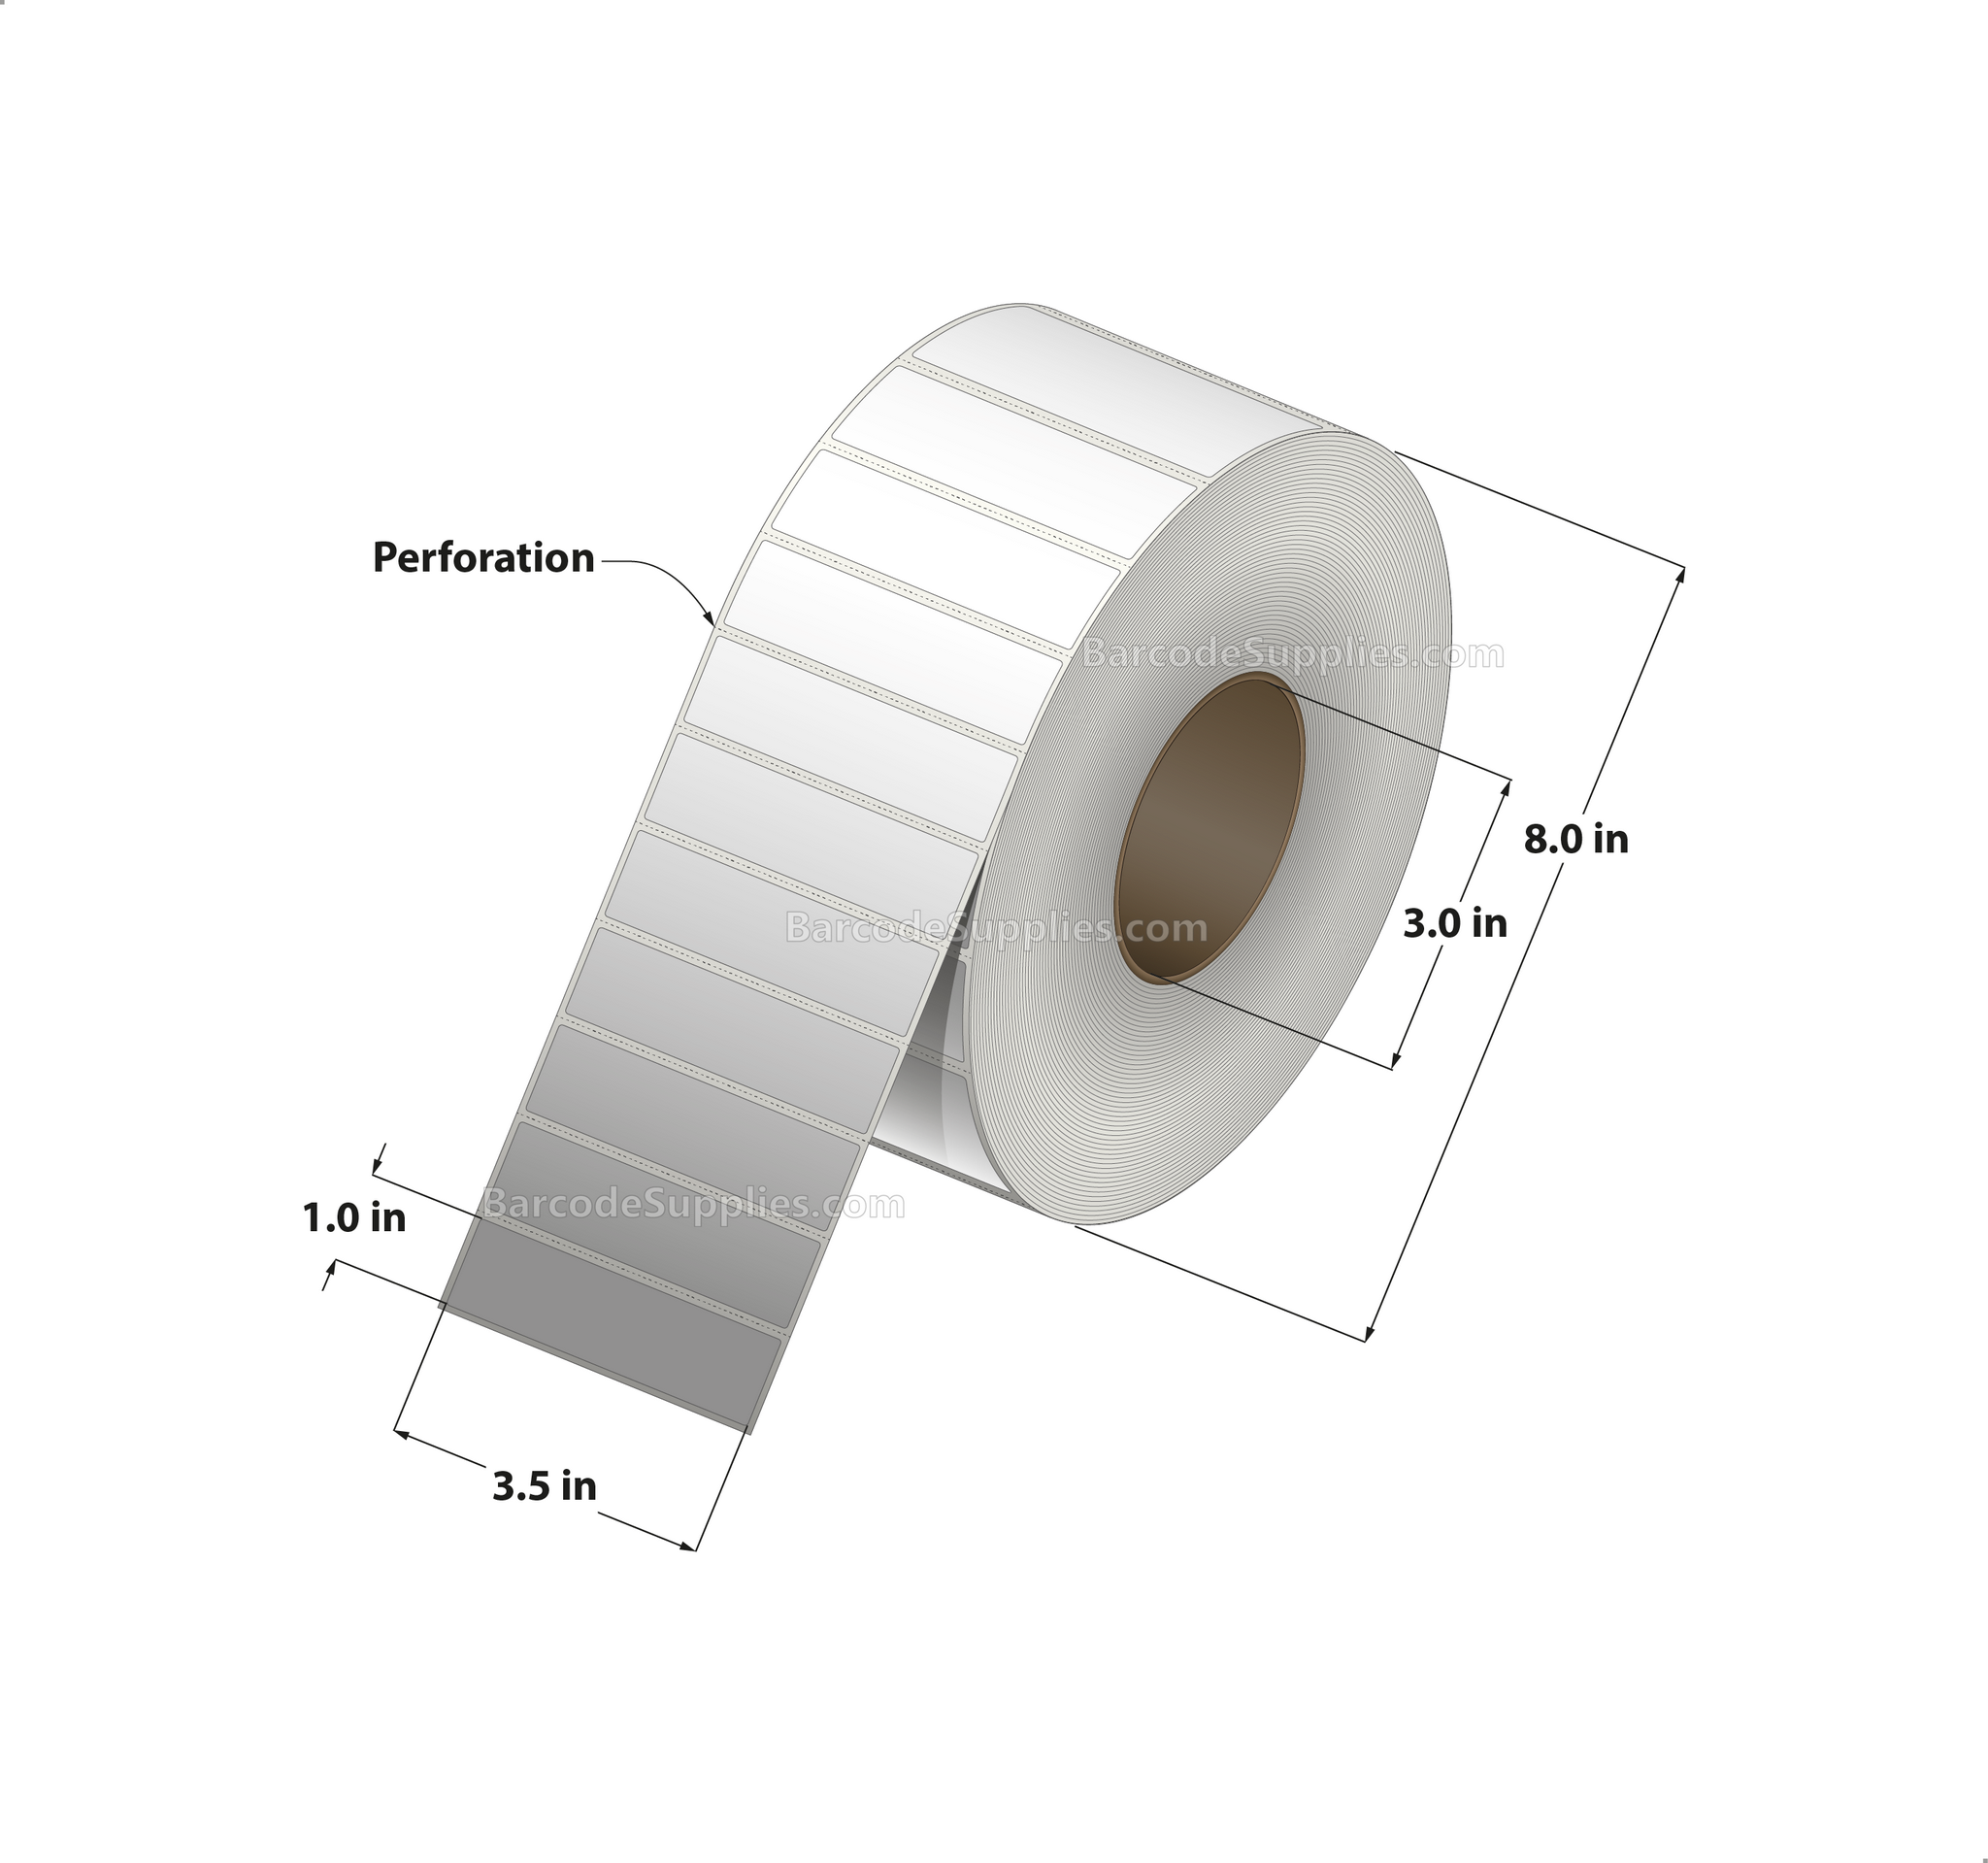 3.5 x 1 Thermal Transfer White Labels With Permanent Adhesive - Perforated - 5500 Labels Per Roll - Carton Of 4 Rolls - 22000 Labels Total - MPN: RT-35-1-5500-3